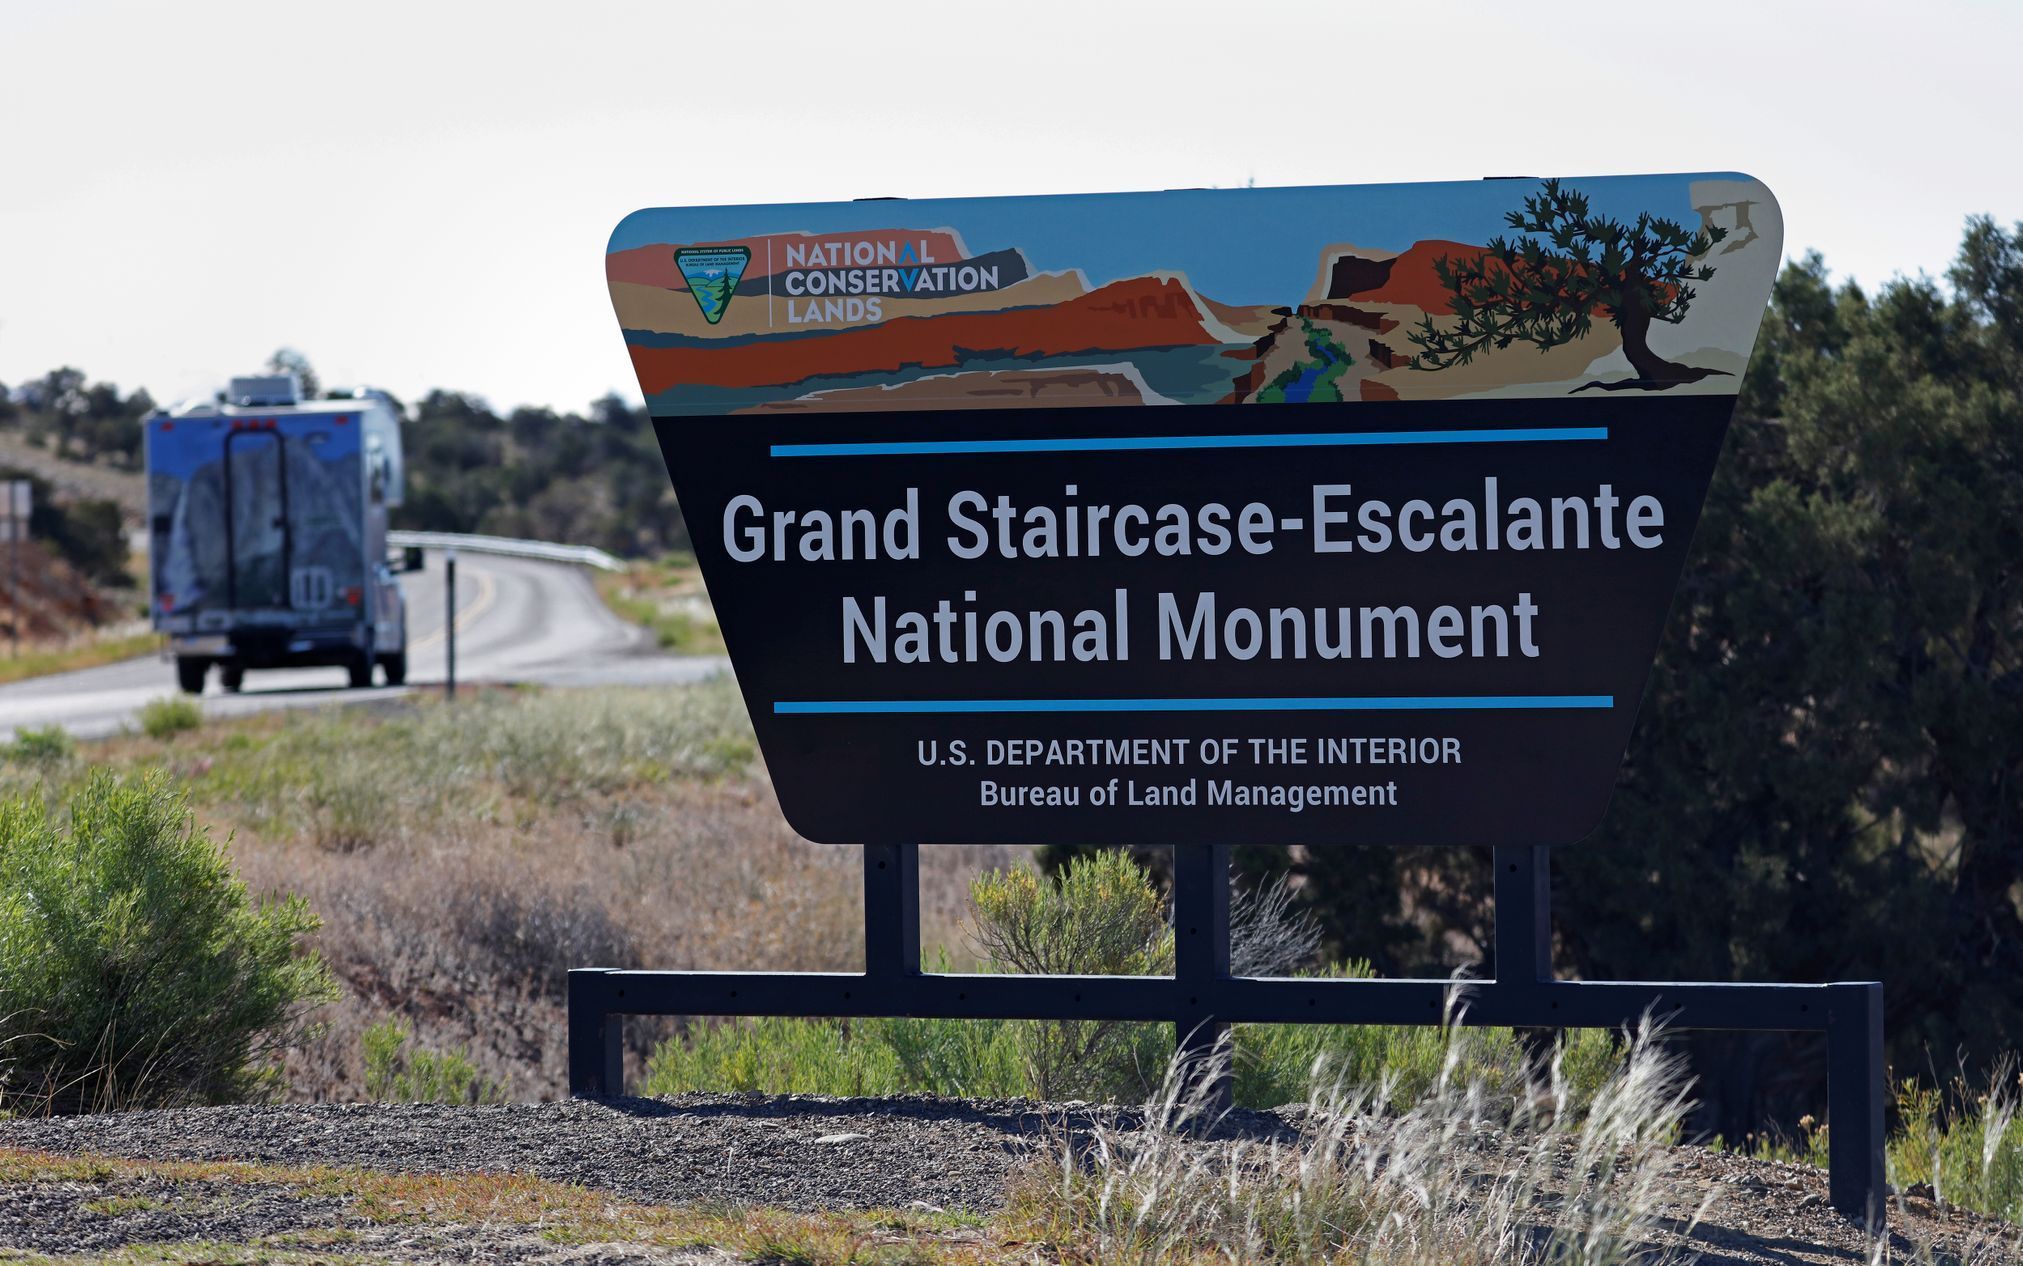 The entrance to Grand Staircase-Escalante National Monument is seen outside of Escalante, Utah.